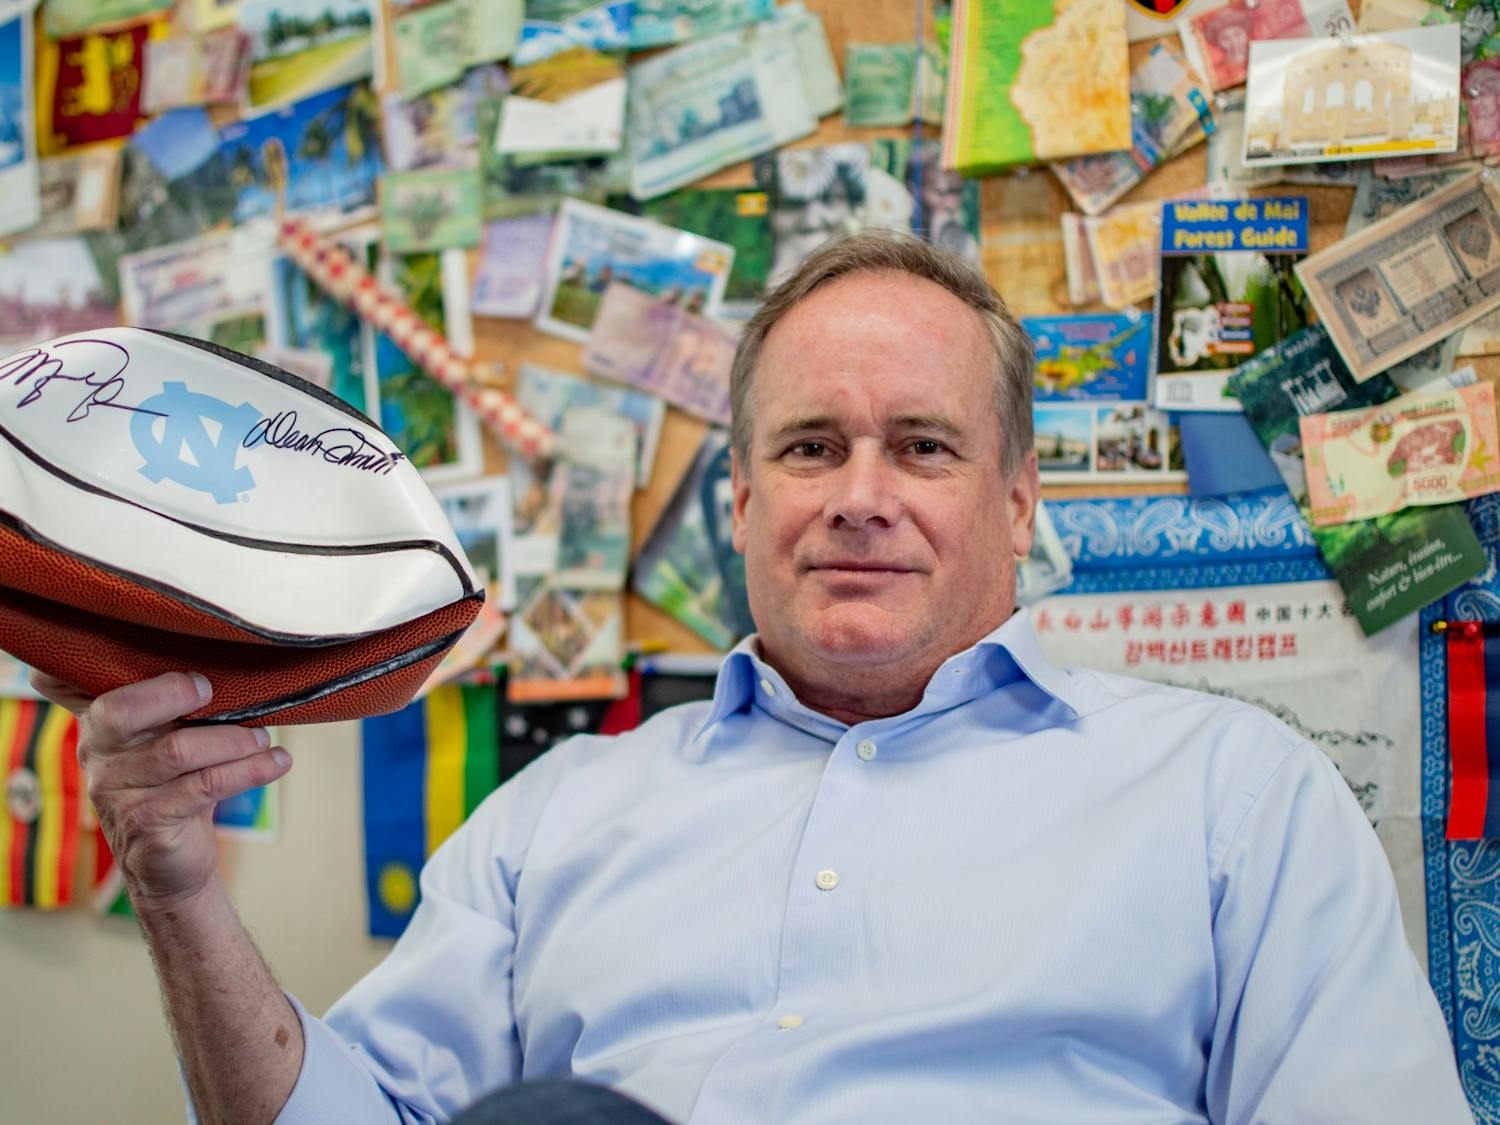 Entrepreneur and UNC Professor of the Practice of Strategy and Entrepreneurship, Jim Kitchen, holds his Michael Jordan and Dean Smith signed basketball in his office on Franklin Street in Chapel Hill on March 22, 2022, exactly one week before he travels to space. The basketball is one of the items he's planning on bringing to space.